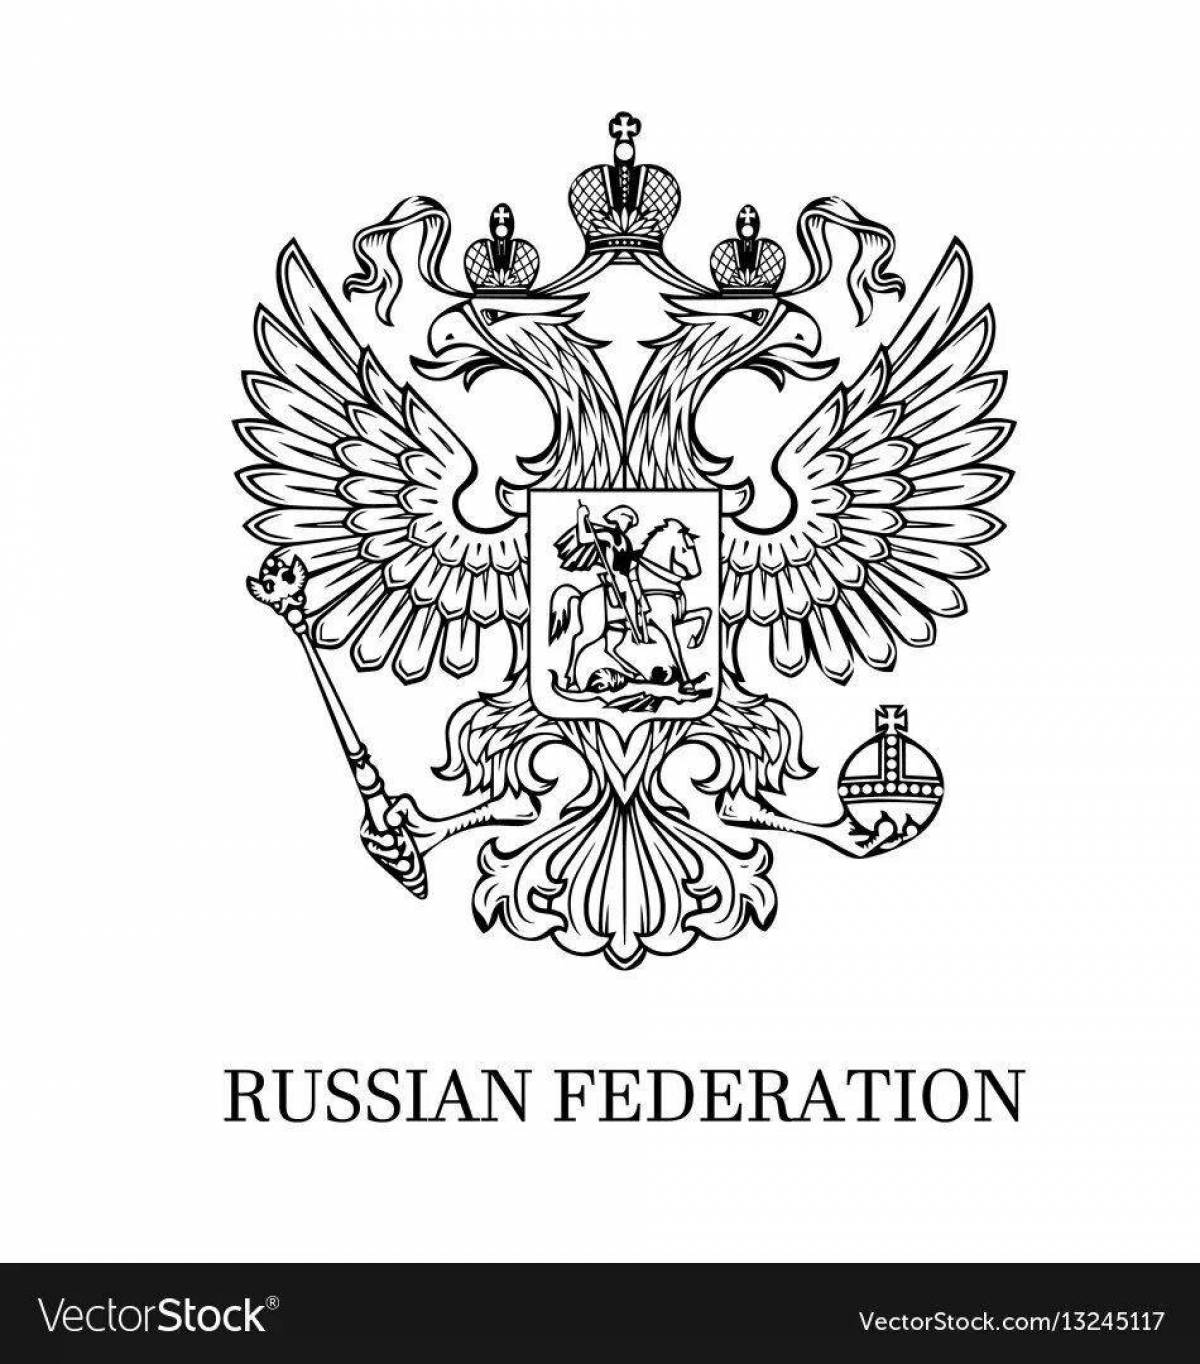 Bold flag of the Russian Federation